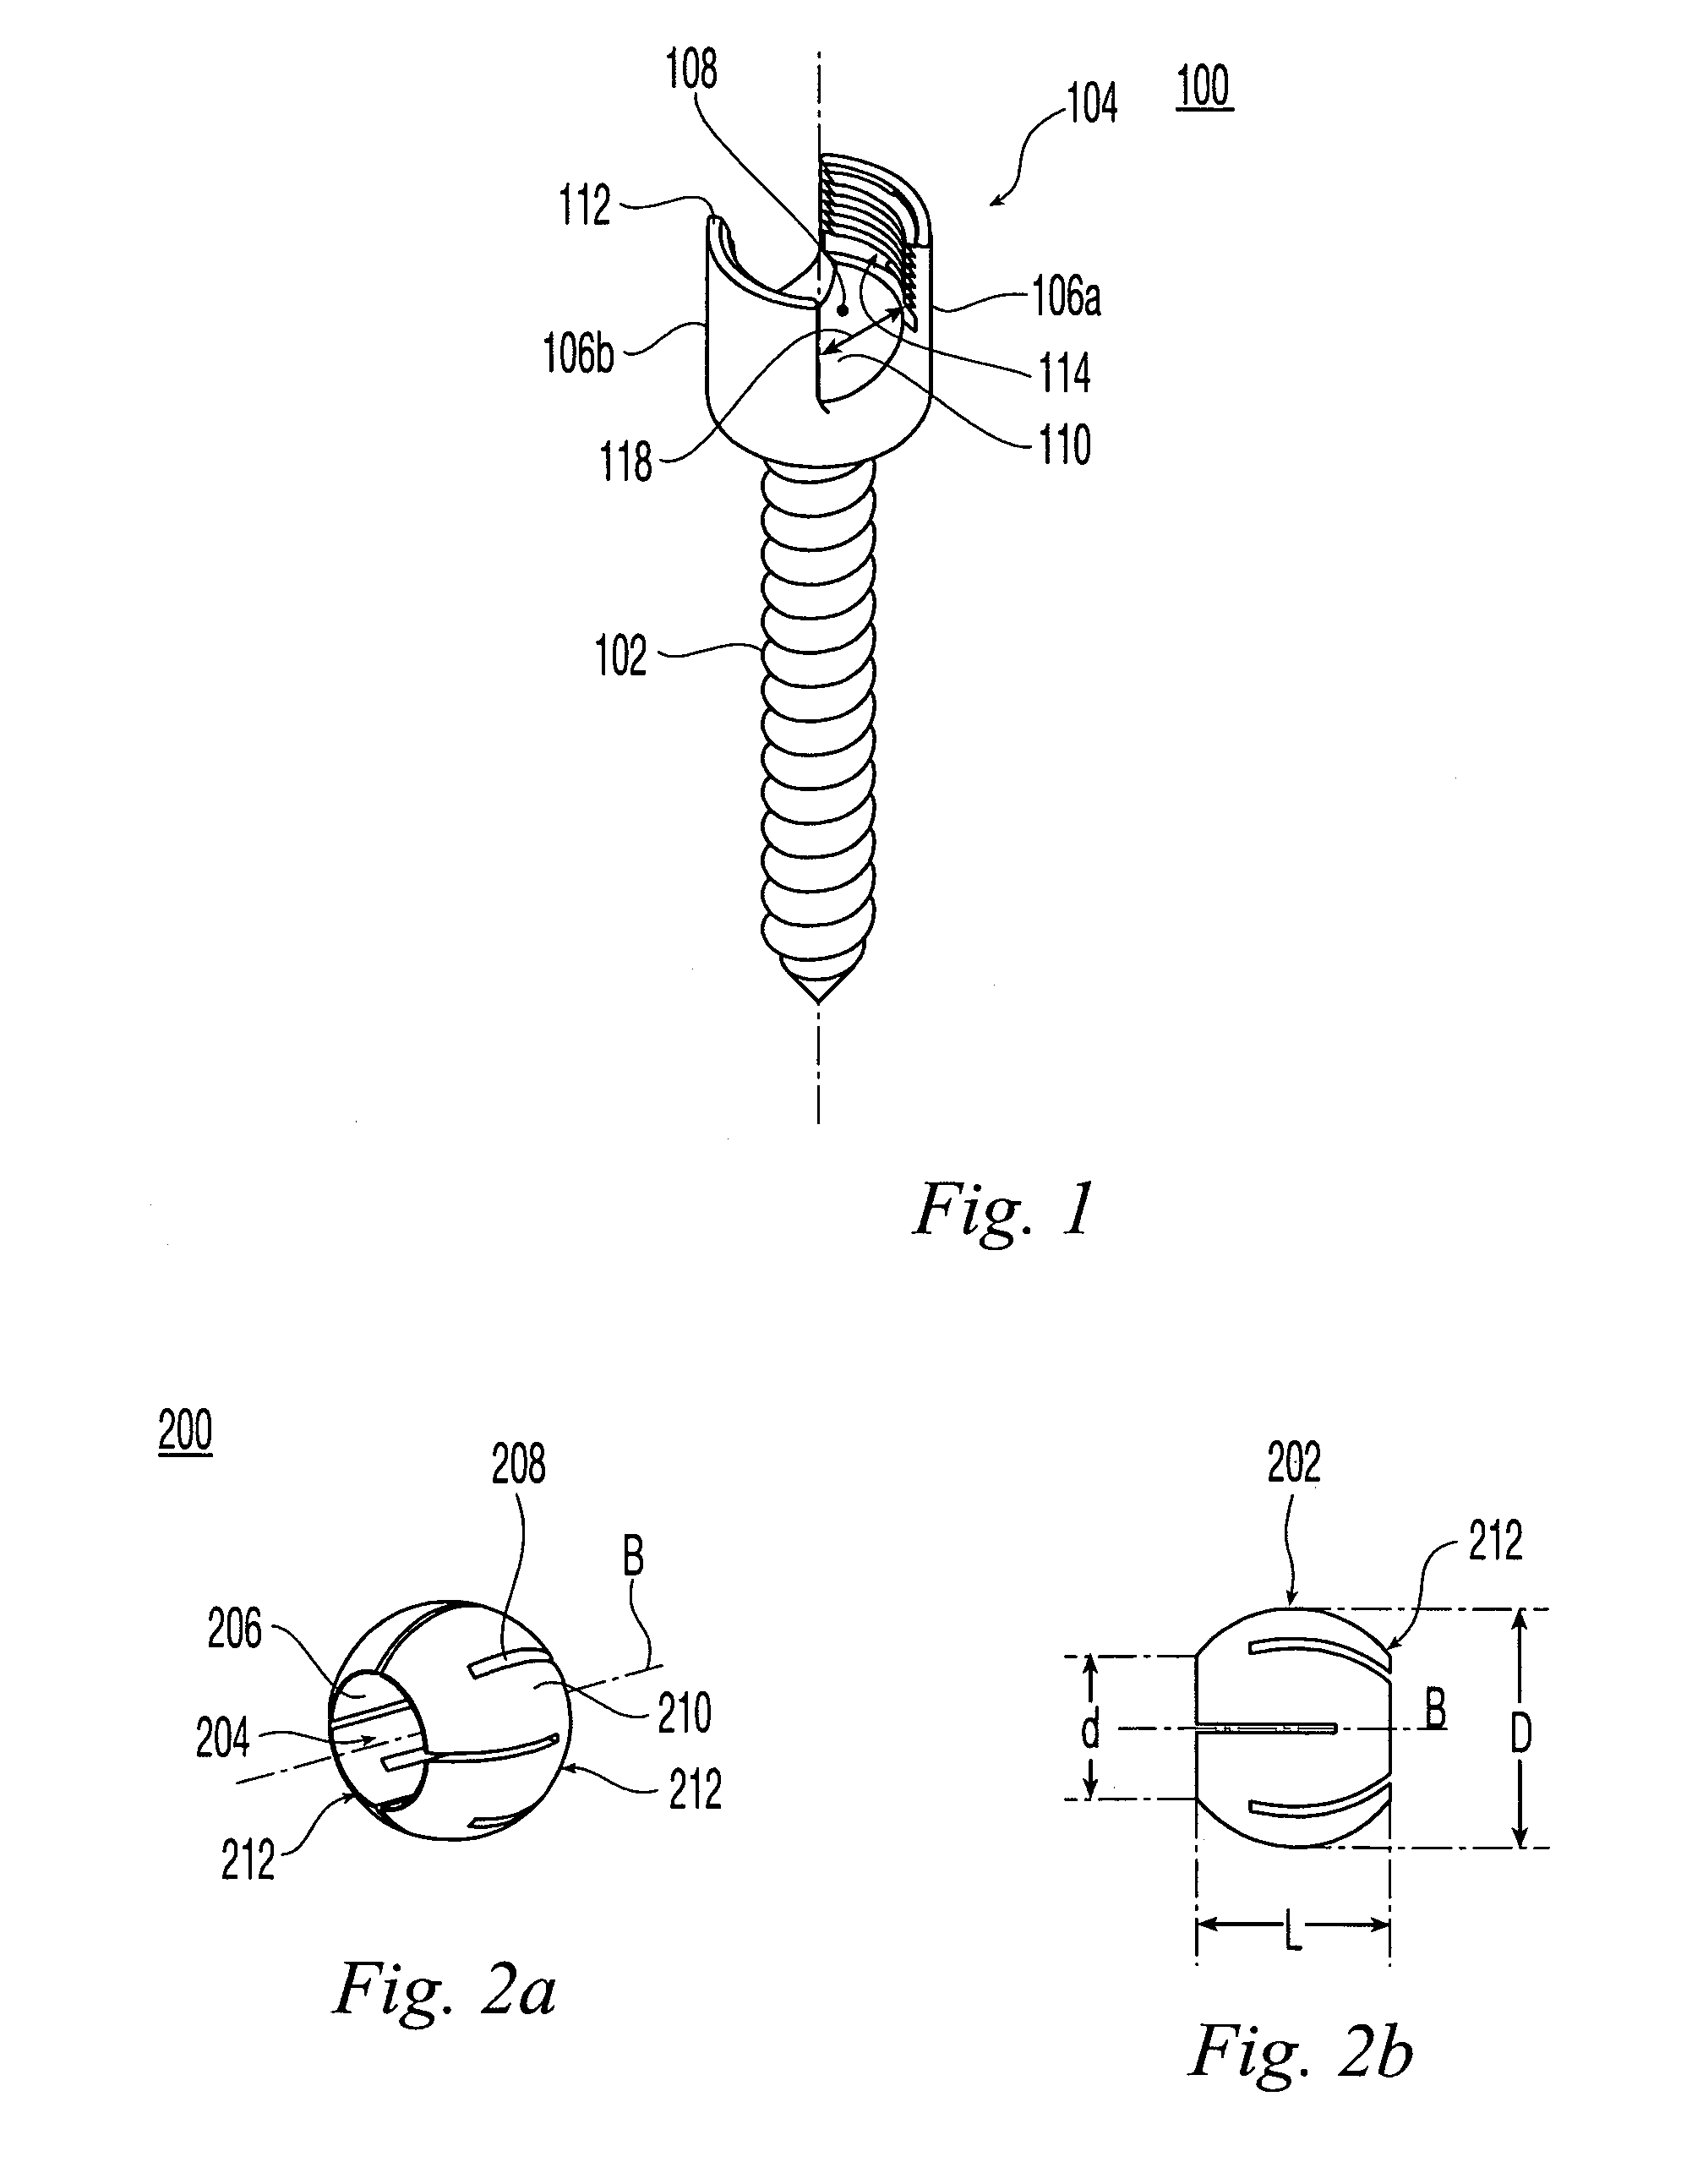 Ball jointed pedicle screw and rod system